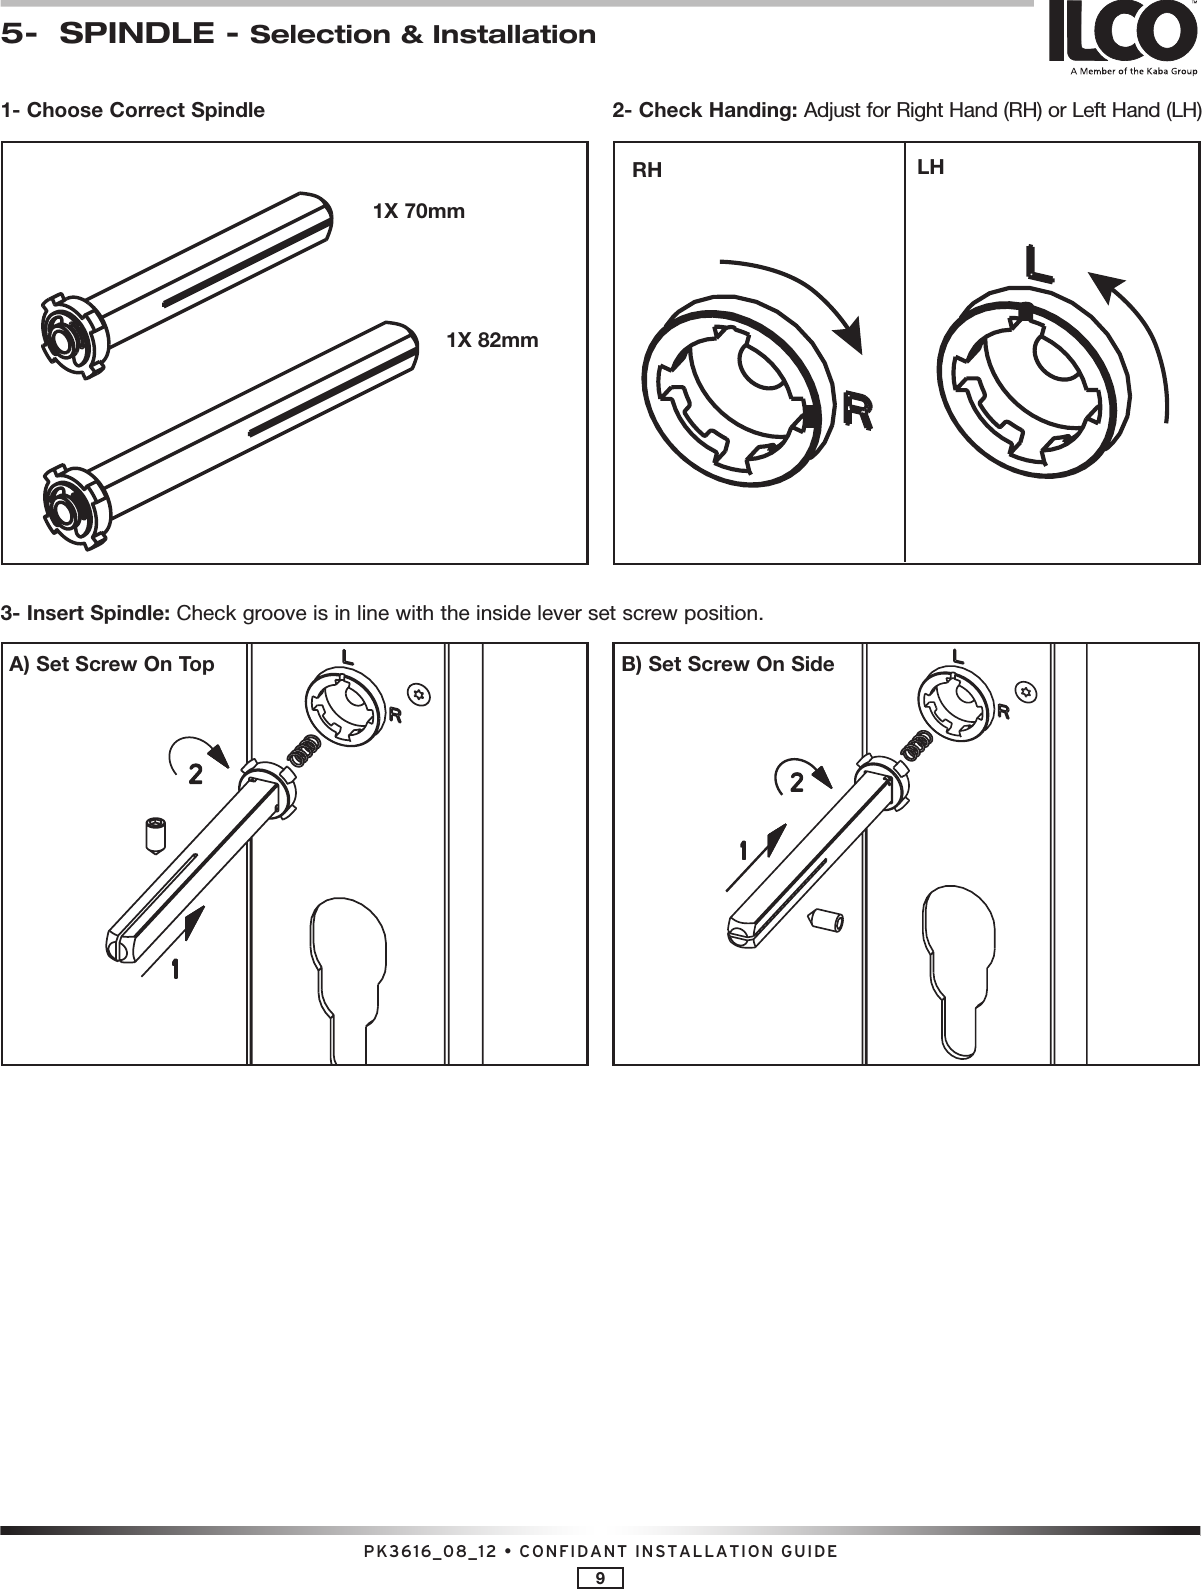 PK3616_08_12 • CONFIDANT INSTALLATION GUIDE95-  SPINDLE - Selection &amp; Installation1- Choose Correct Spindle 2- Check Handing: Adjust for Right Hand (RH) or Left Hand (LH)3- Insert Spindle: Check groove is in line with the inside lever set screw position.RH LHA) Set Screw On Top B) Set Screw On Side1X 70mm1X 82mm